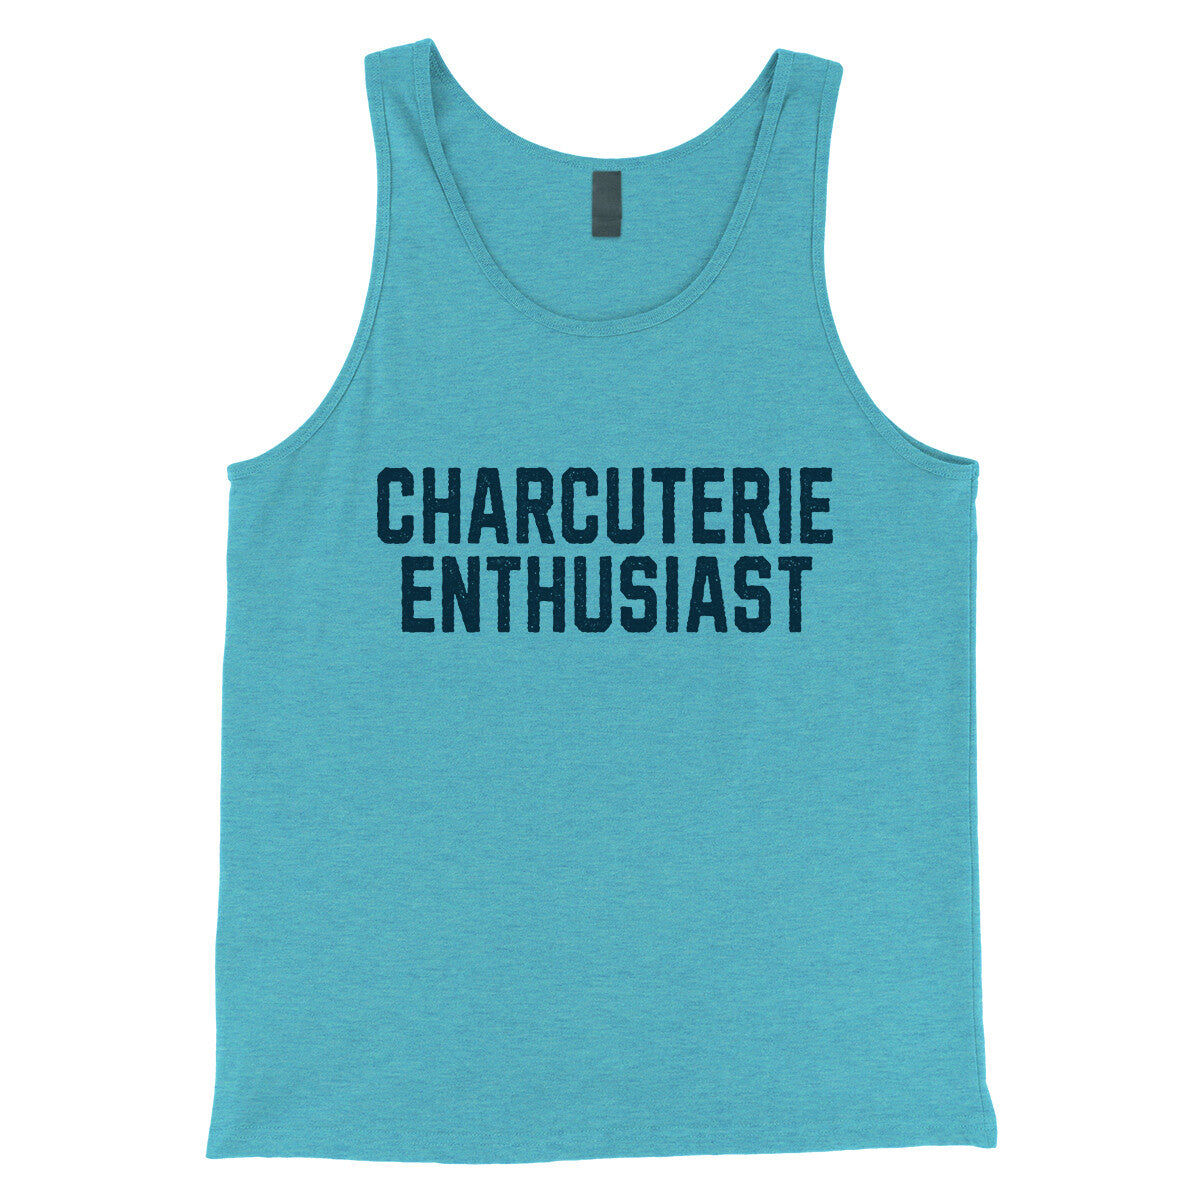 Charcuterie Enthusiast in Aqua Triblend Color